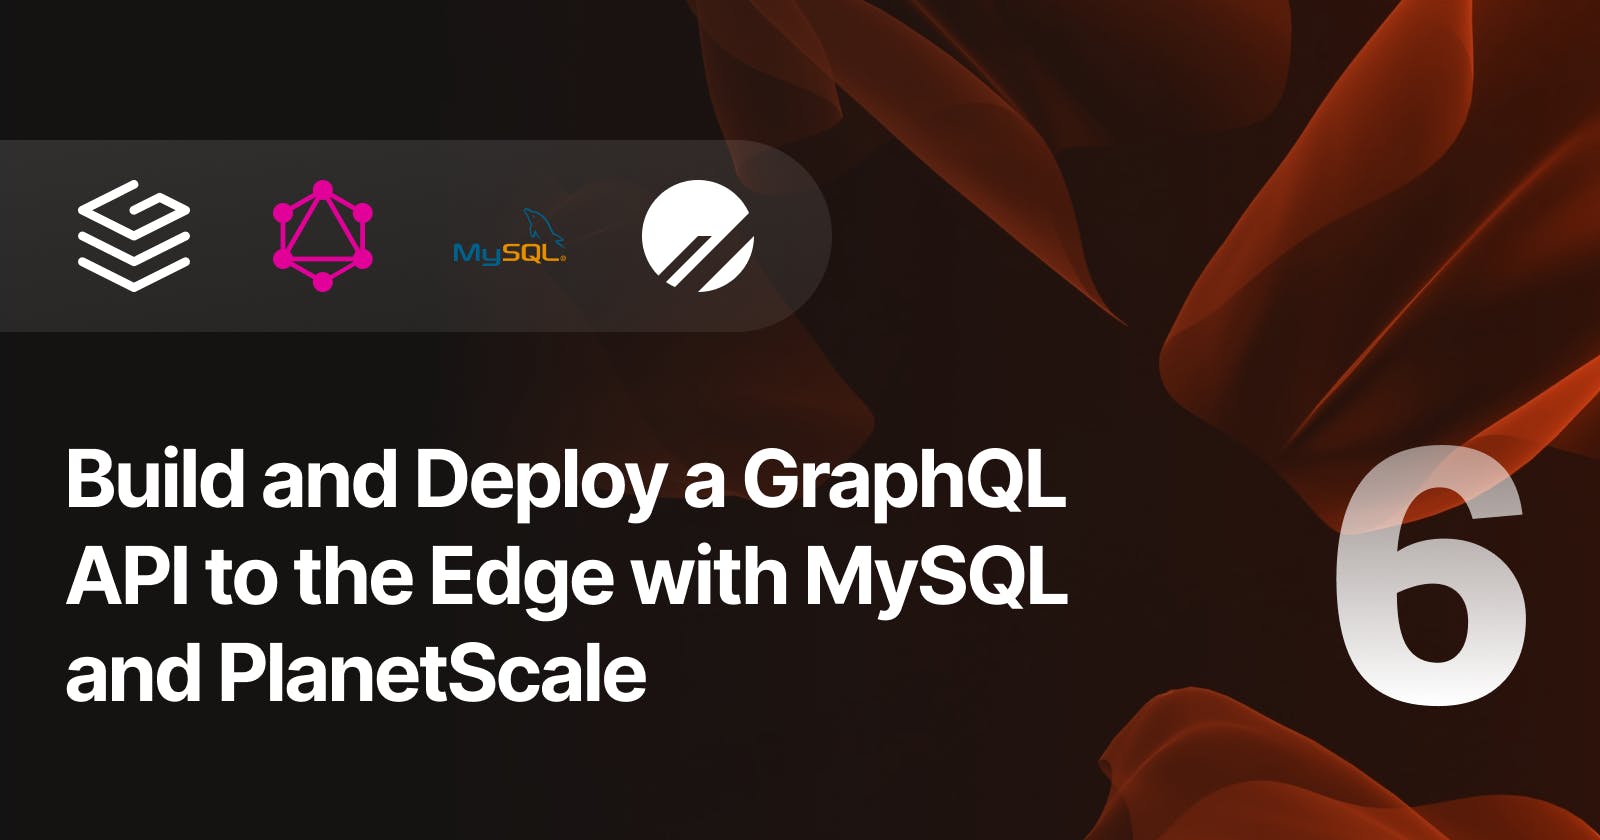 Build and Deploy a GraphQL API to the Edge with MySQL and PlanetScale — Part 6